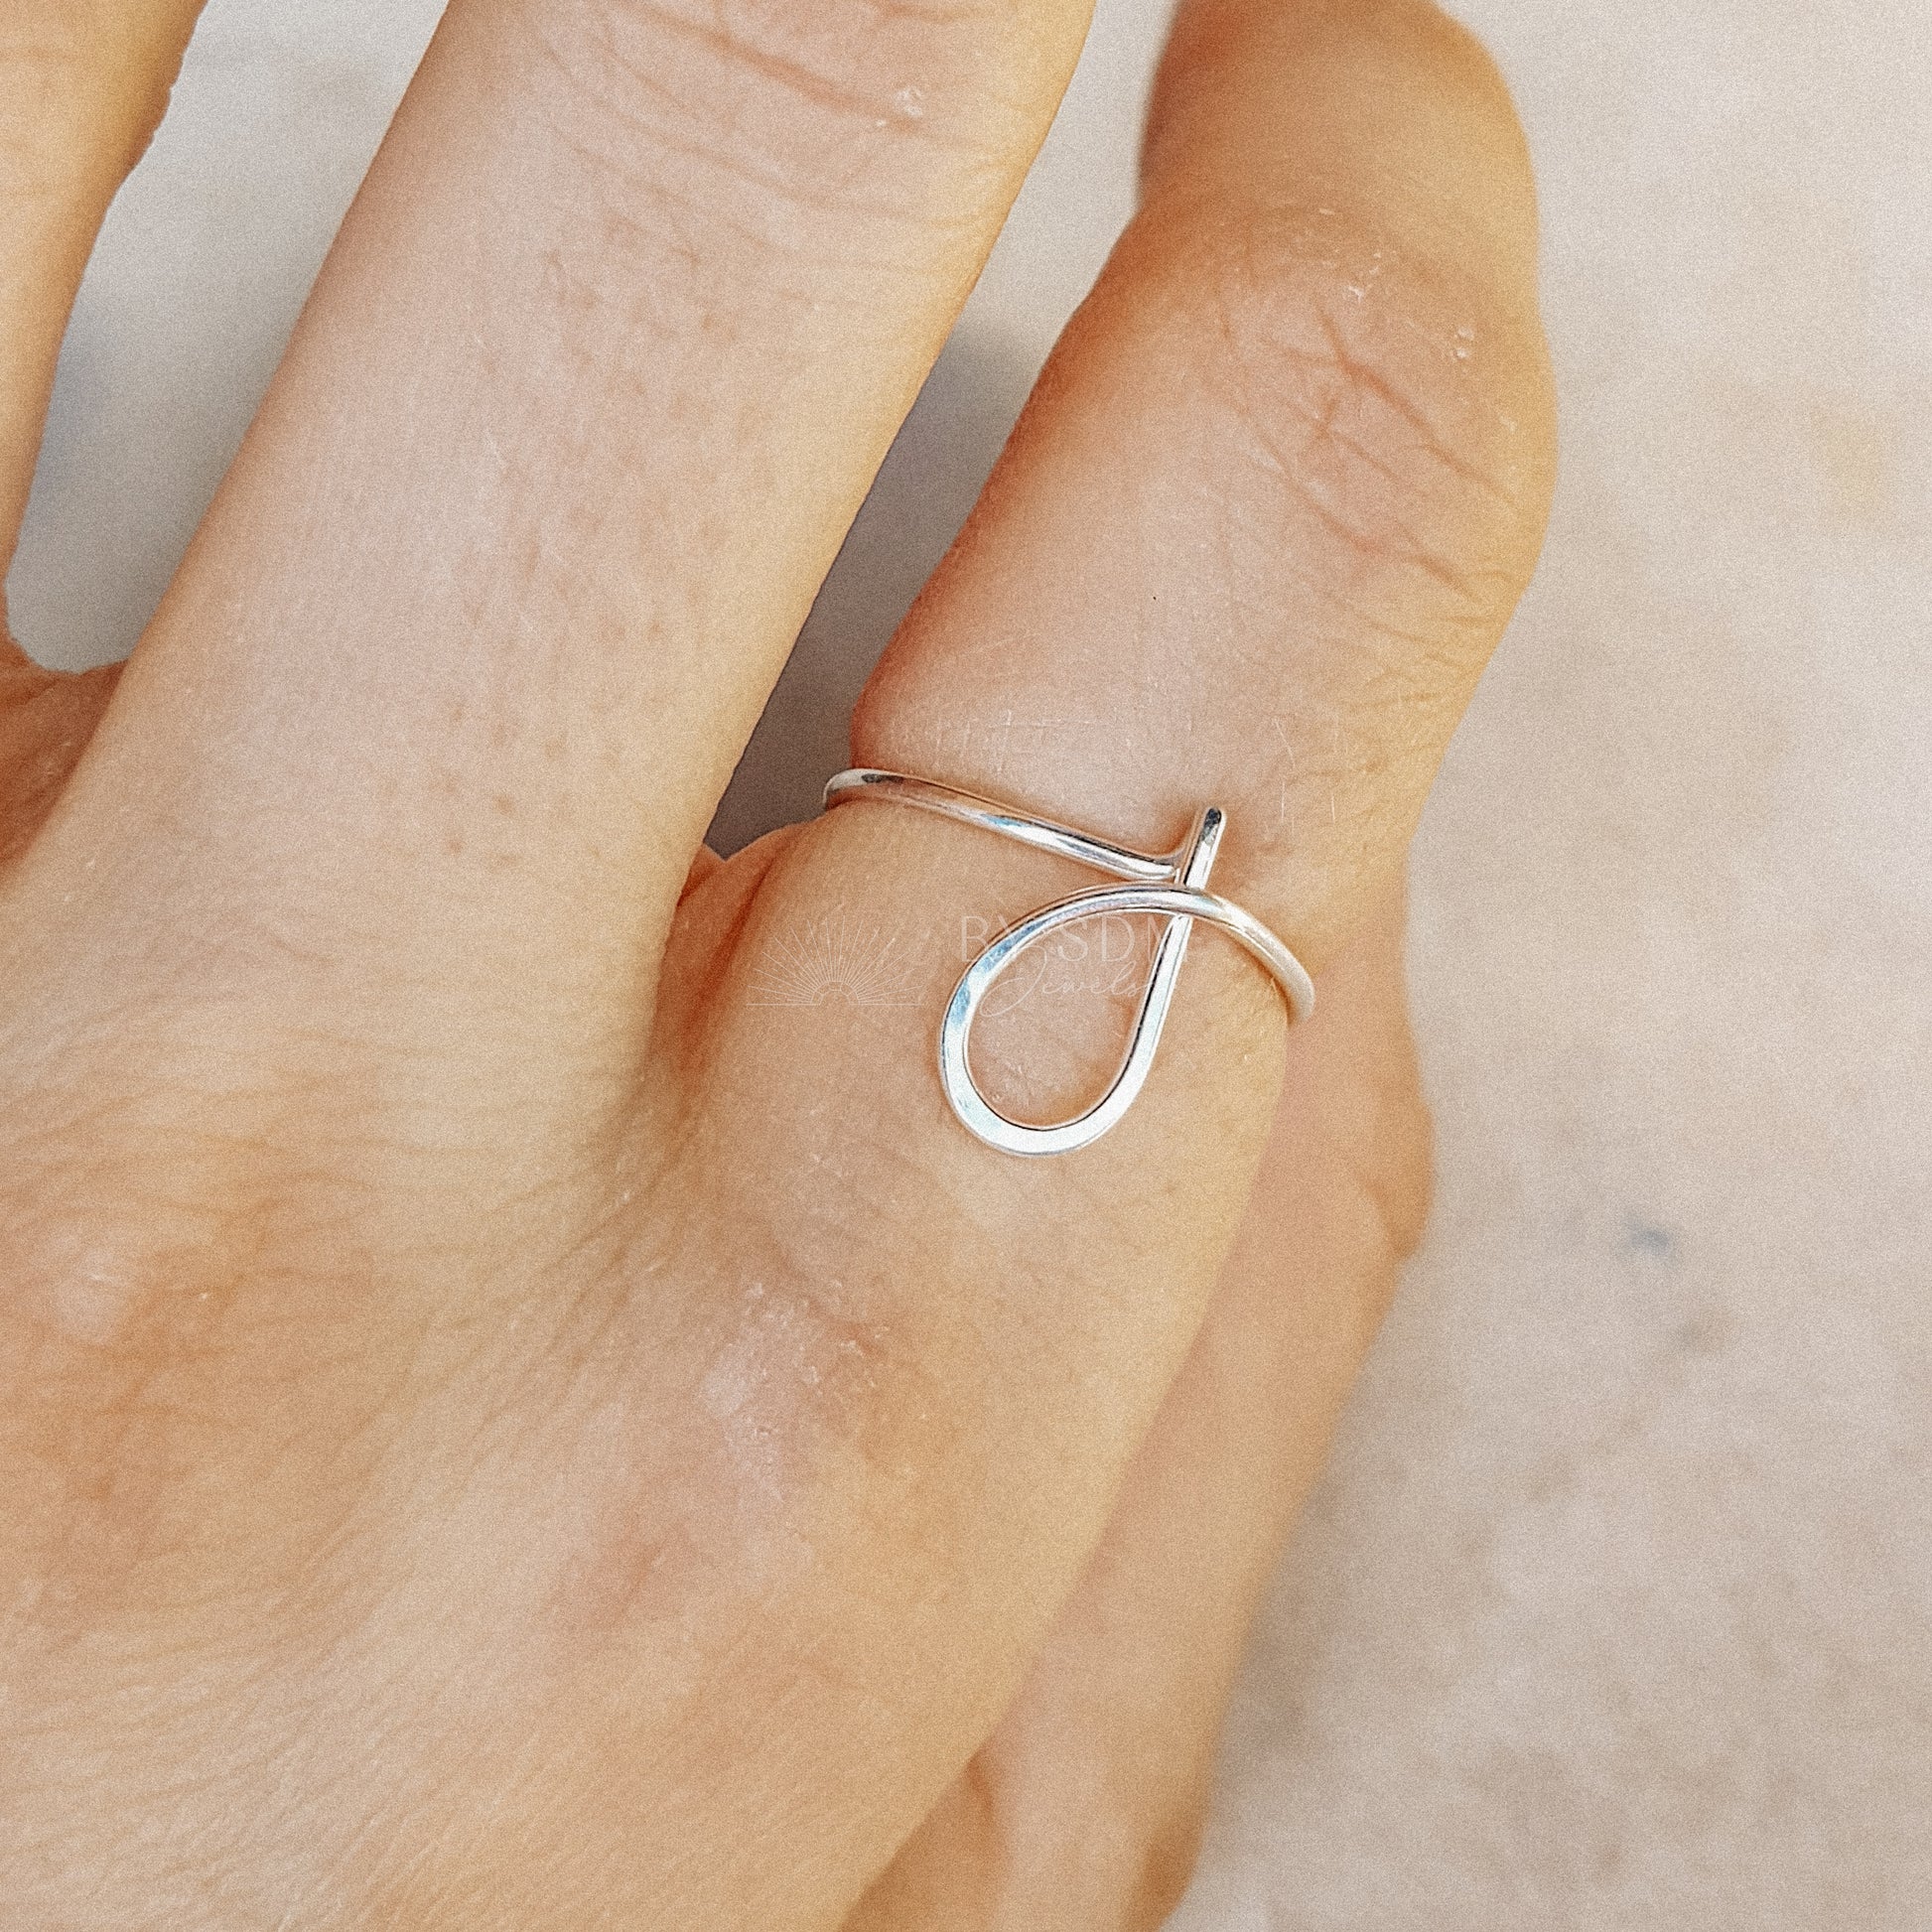 Dainty Initial Ring • J Letter Ring • Personalized Initial Ring • Initial Name Ring • Adjustable Ring • Bridesmaid Gift • BYSDMJEWELS